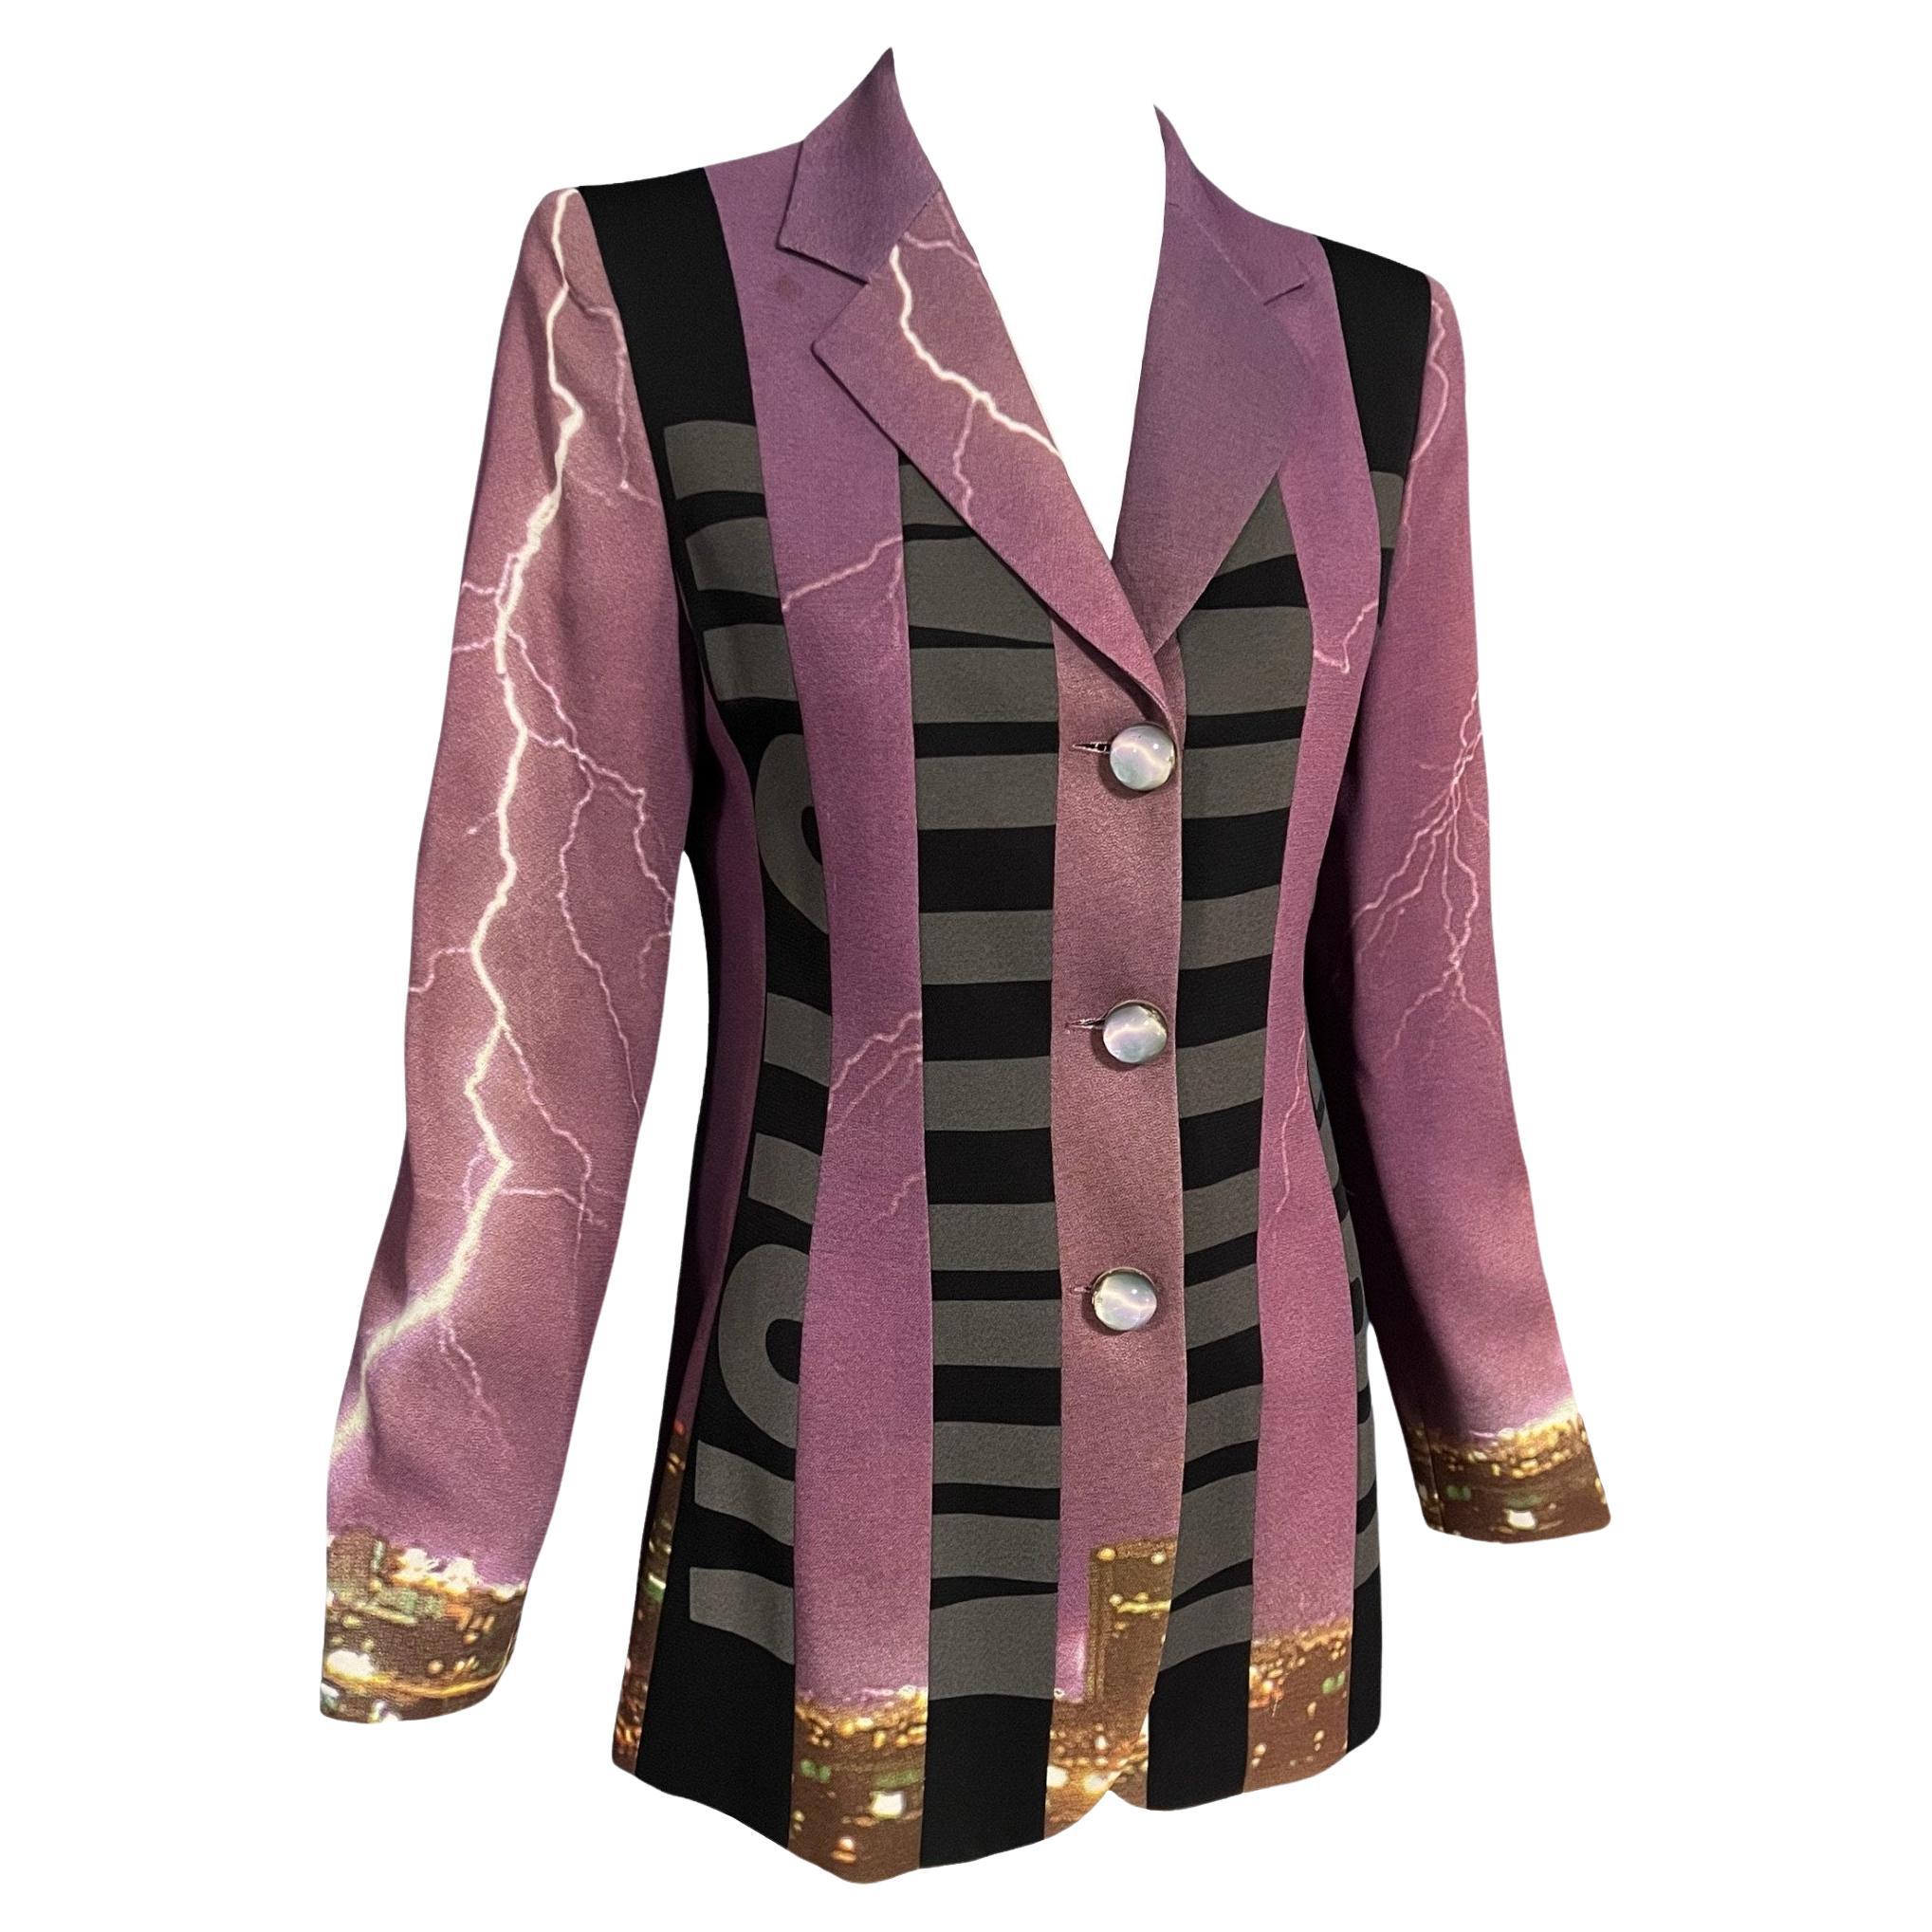 Stunning unique Moschino Cheap & Chic purple jacket printed with an amazing nightime lighted city skyline with thrilling lightning printed throughout with large text of 